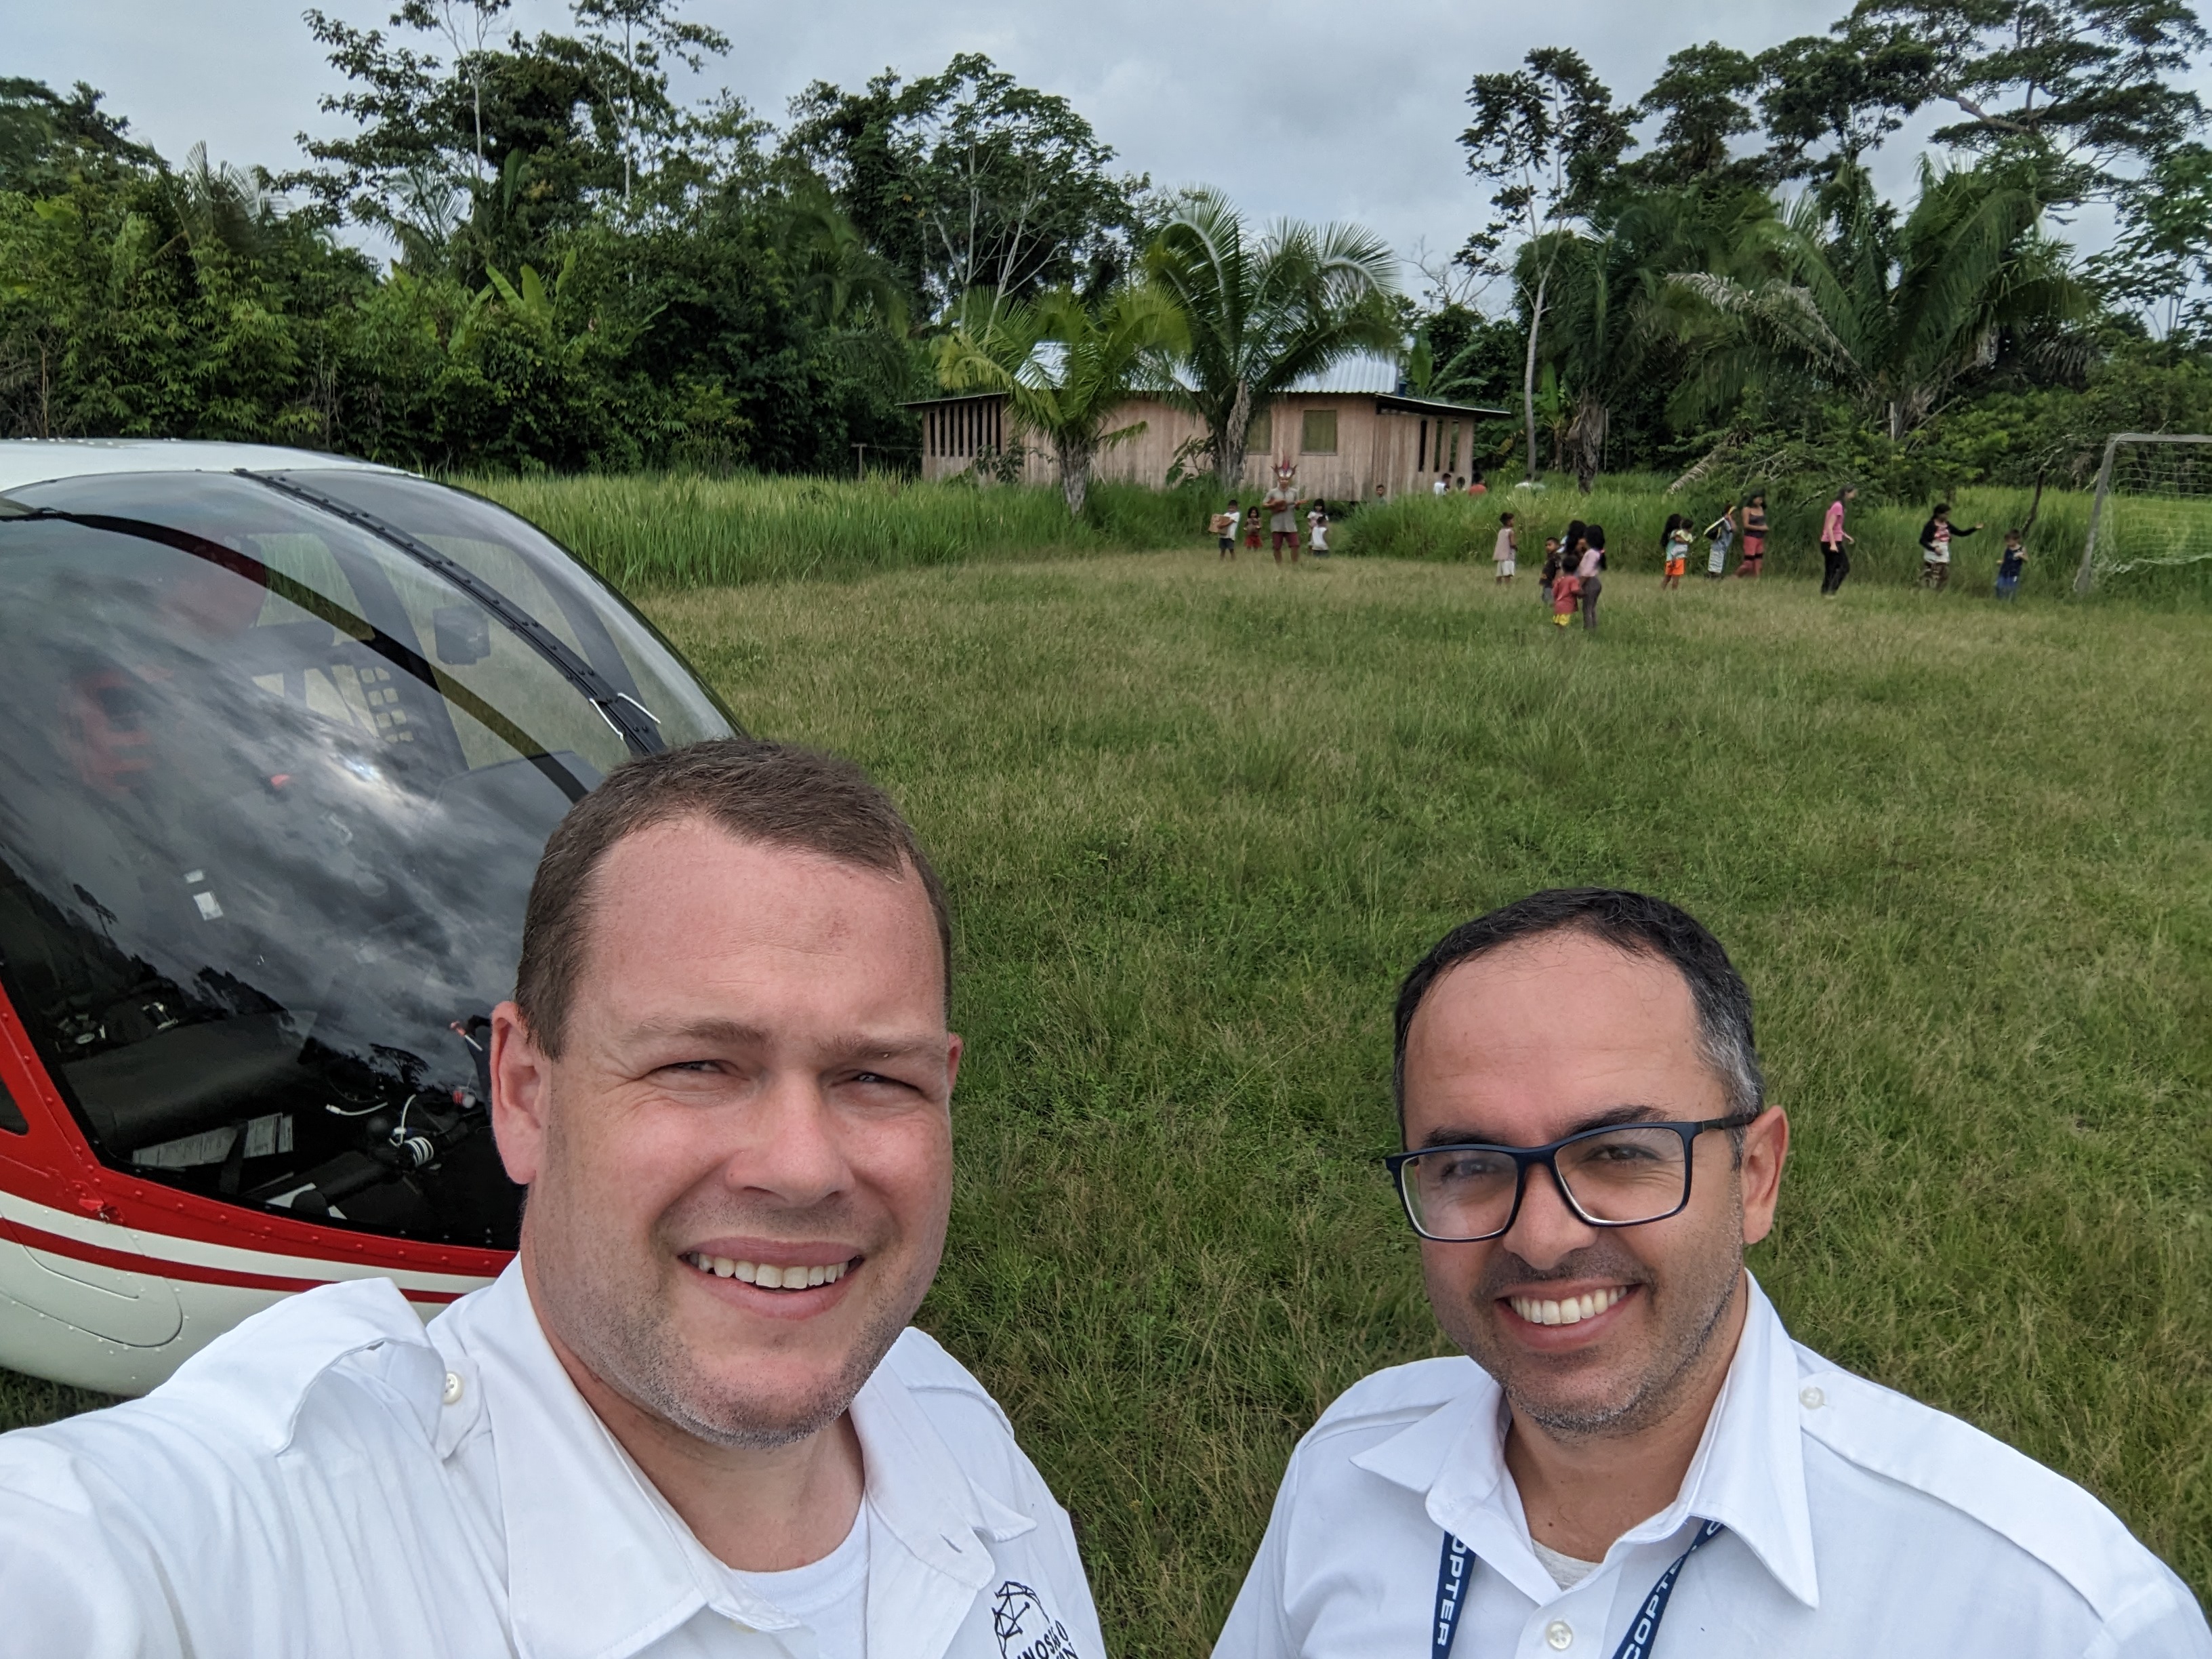 Two male helicopter pilots stand in front of an R66 helicopter and a group of children playing in Brazil.